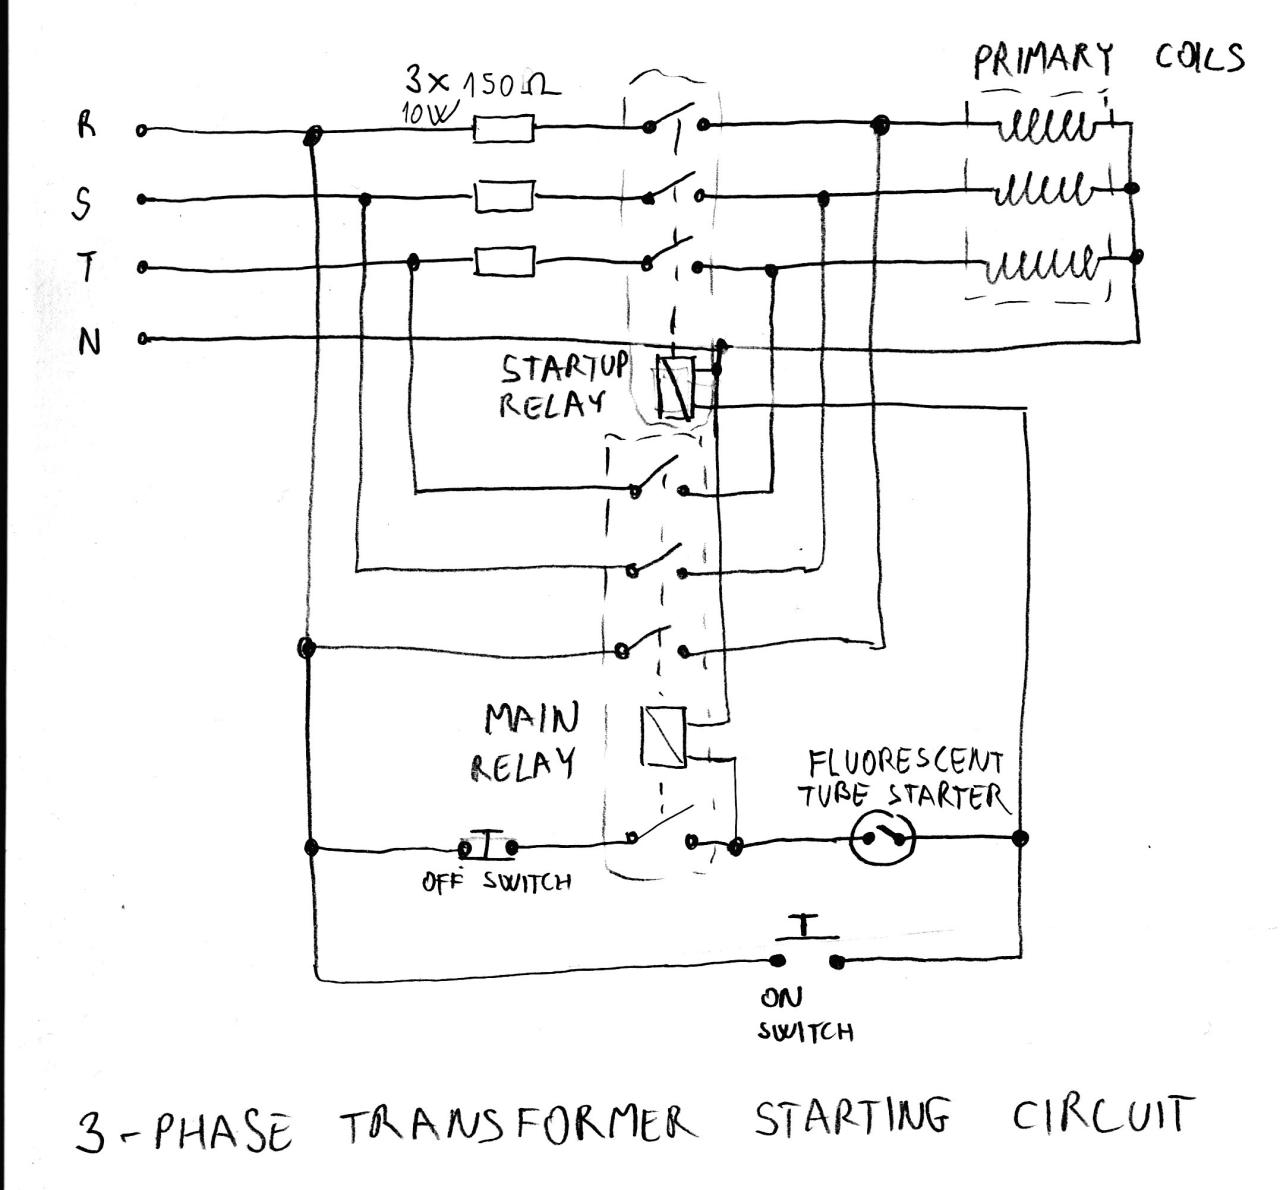 Wiring 3 Phase Transformer Connection Diagram